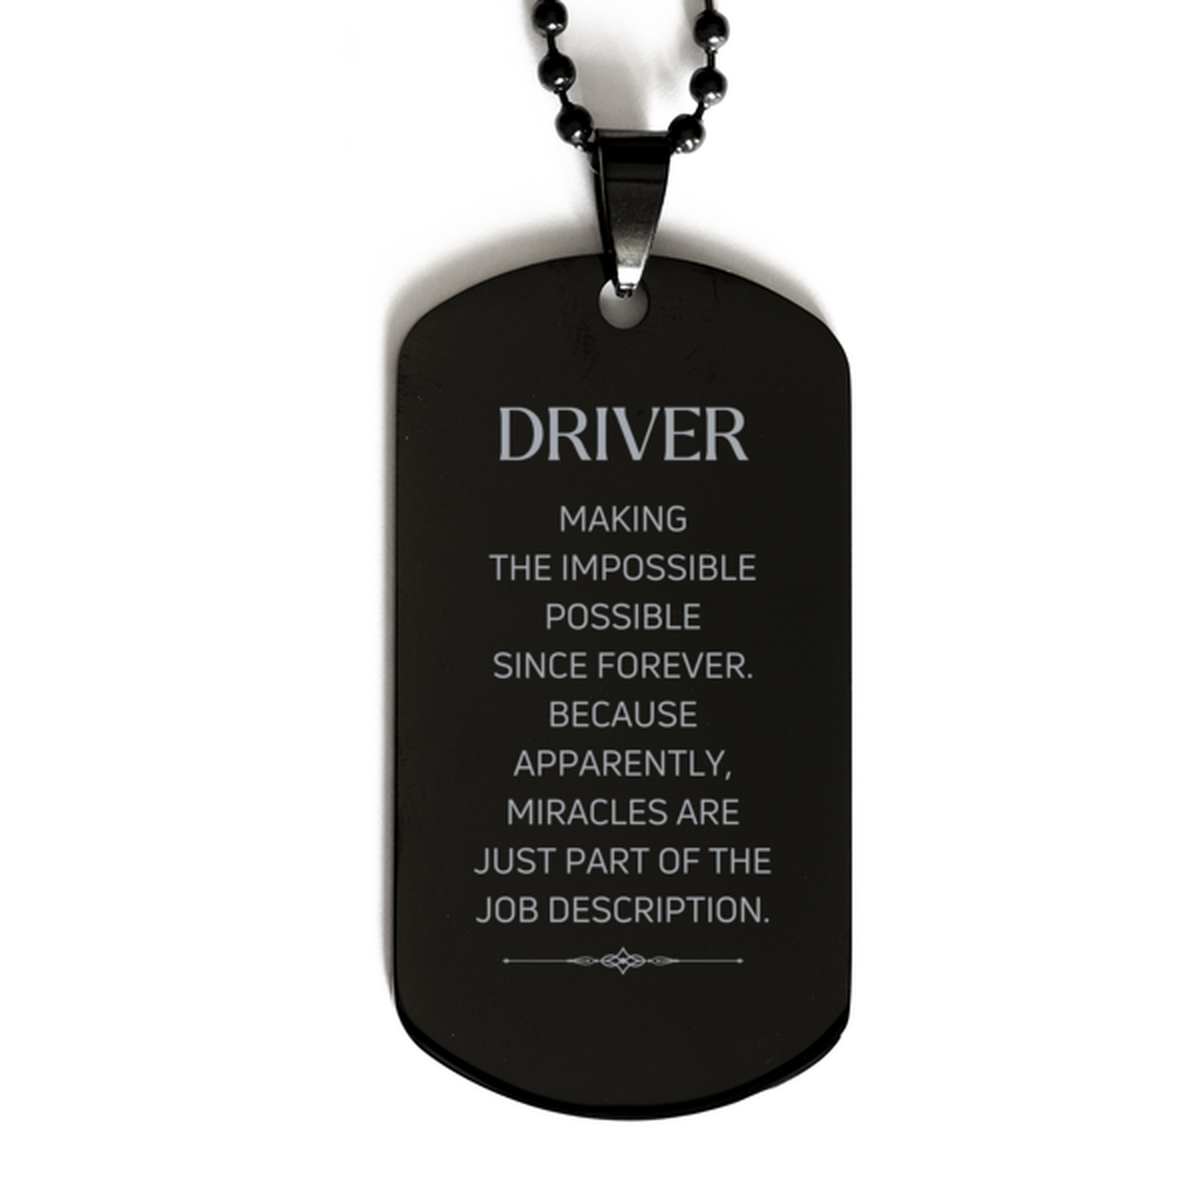 Funny Driver Gifts, Miracles are just part of the job description, Inspirational Birthday Black Dog Tag For Driver, Men, Women, Coworkers, Friends, Boss